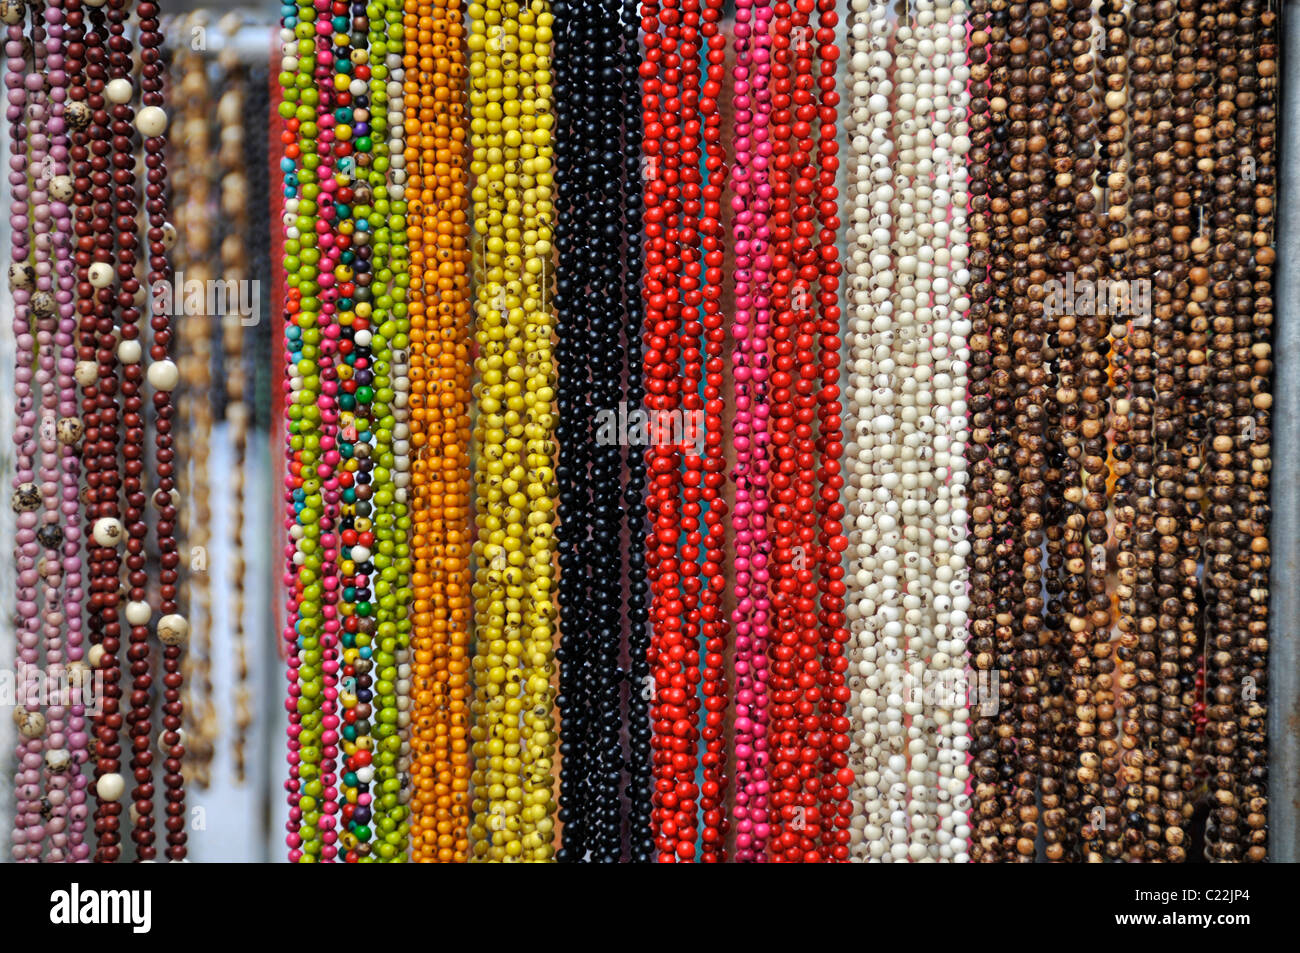 Wooden Beads On A String Making A Colorful Toy Necklace Stock Photo,  Picture and Royalty Free Image. Image 26229227.